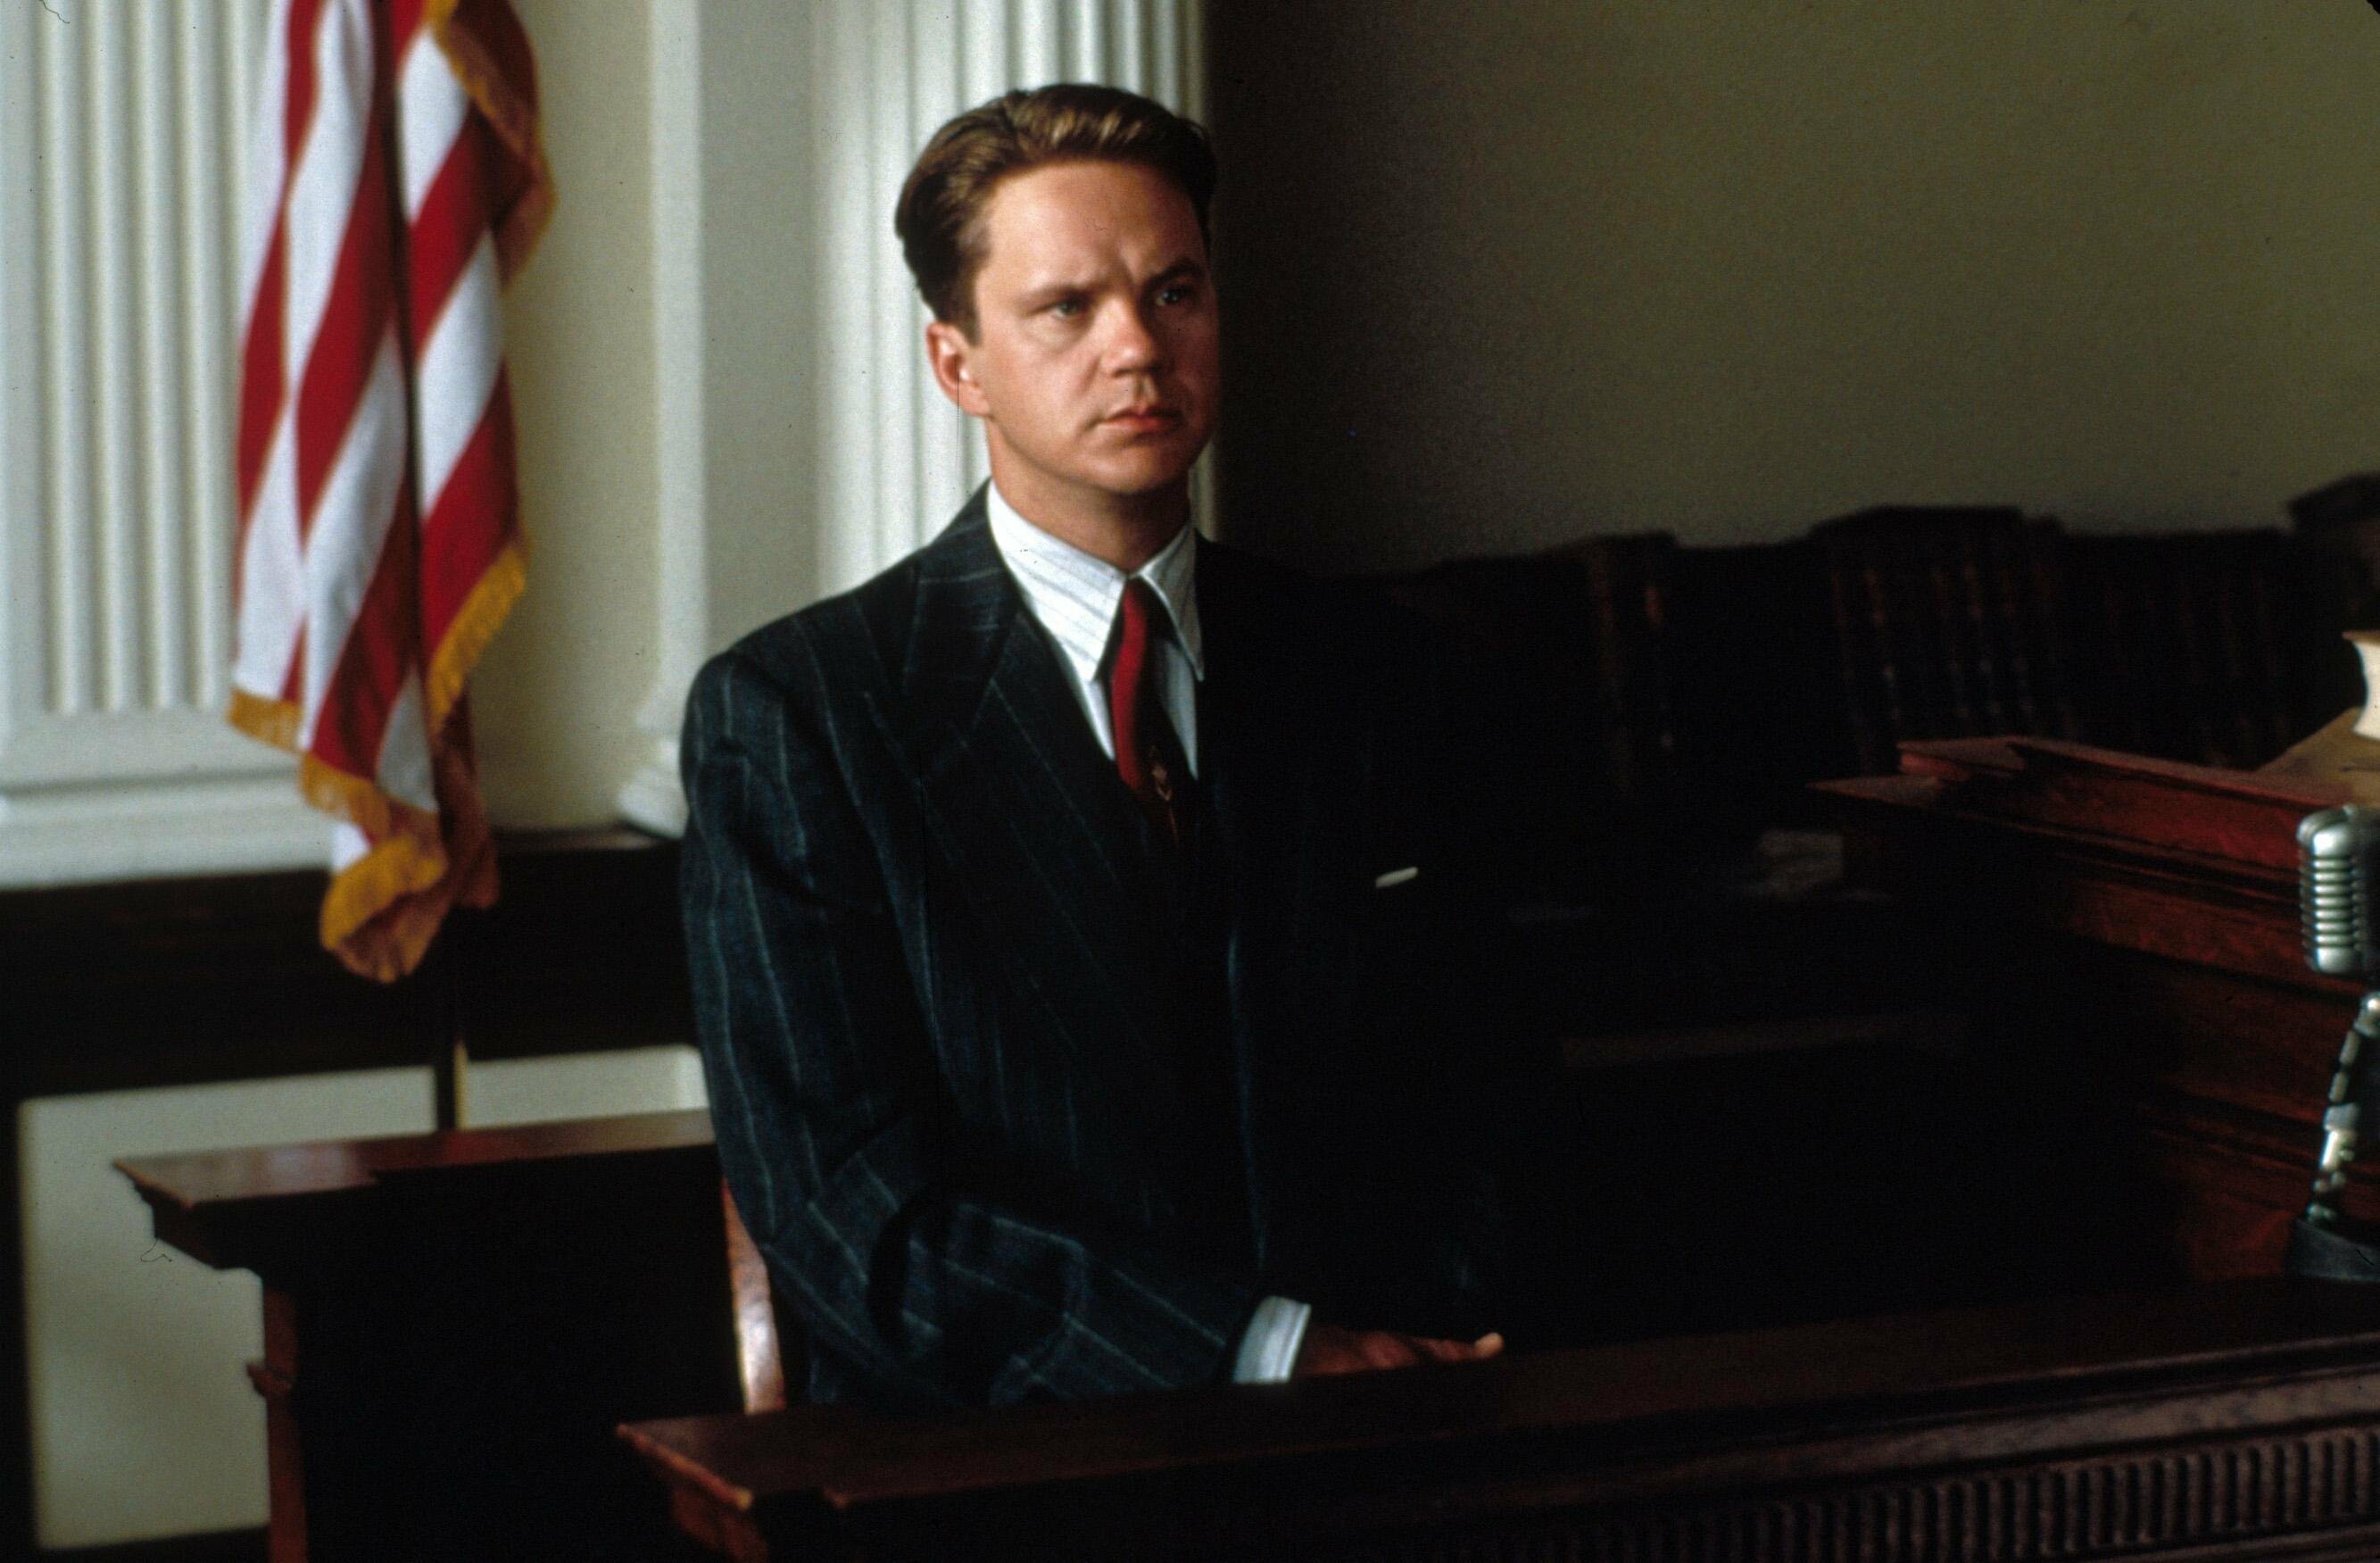 The Shawshank Redemption: Andy Dufresne, A banker sentenced to life in prison in 1947 for the murder of his wife and her lover. 2670x1760 HD Wallpaper.